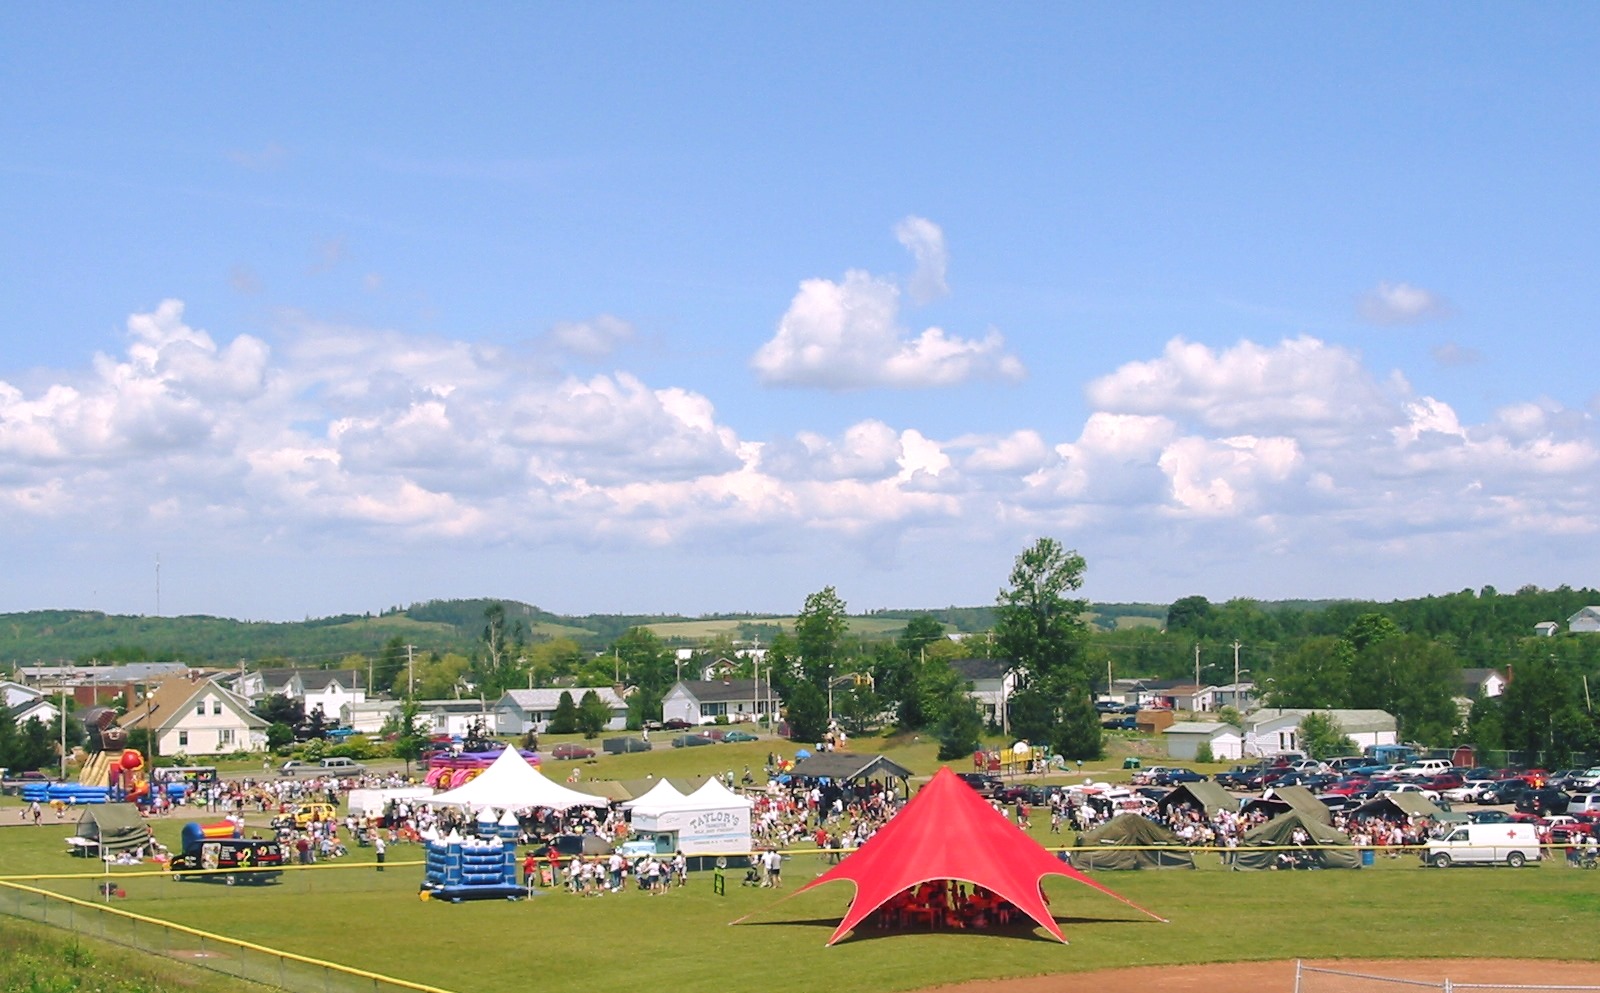 Far away picture of Bible Hill Recreation Park during Canada Day celebrations, with the sky, tents and bouncy castles in view